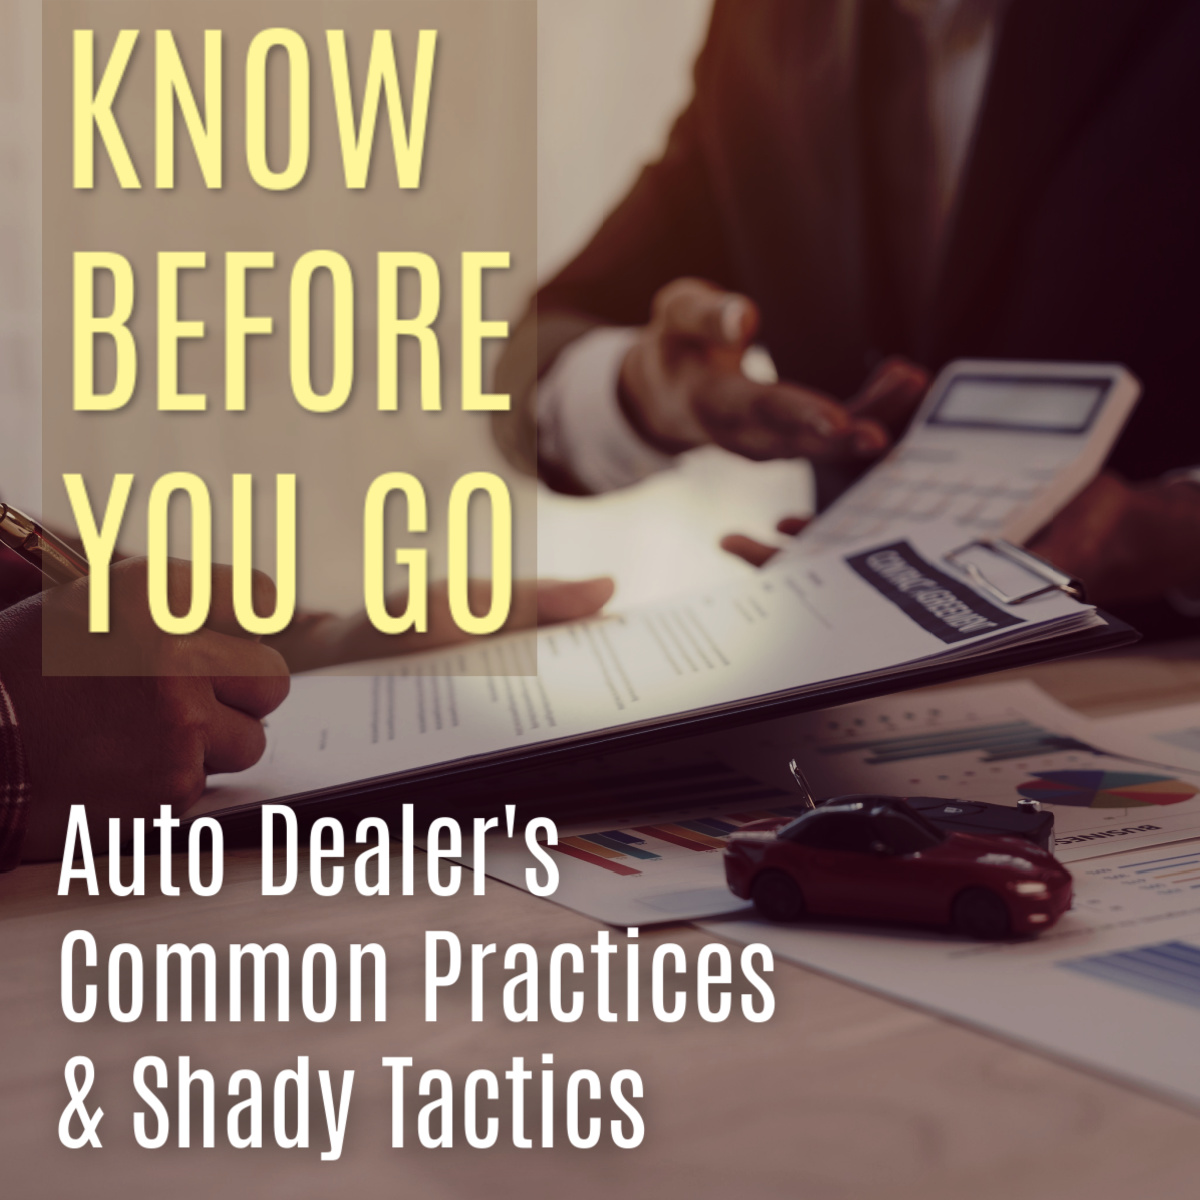 Know Before You Go: Auto Dealer’s Common Practices & Shady Tactics